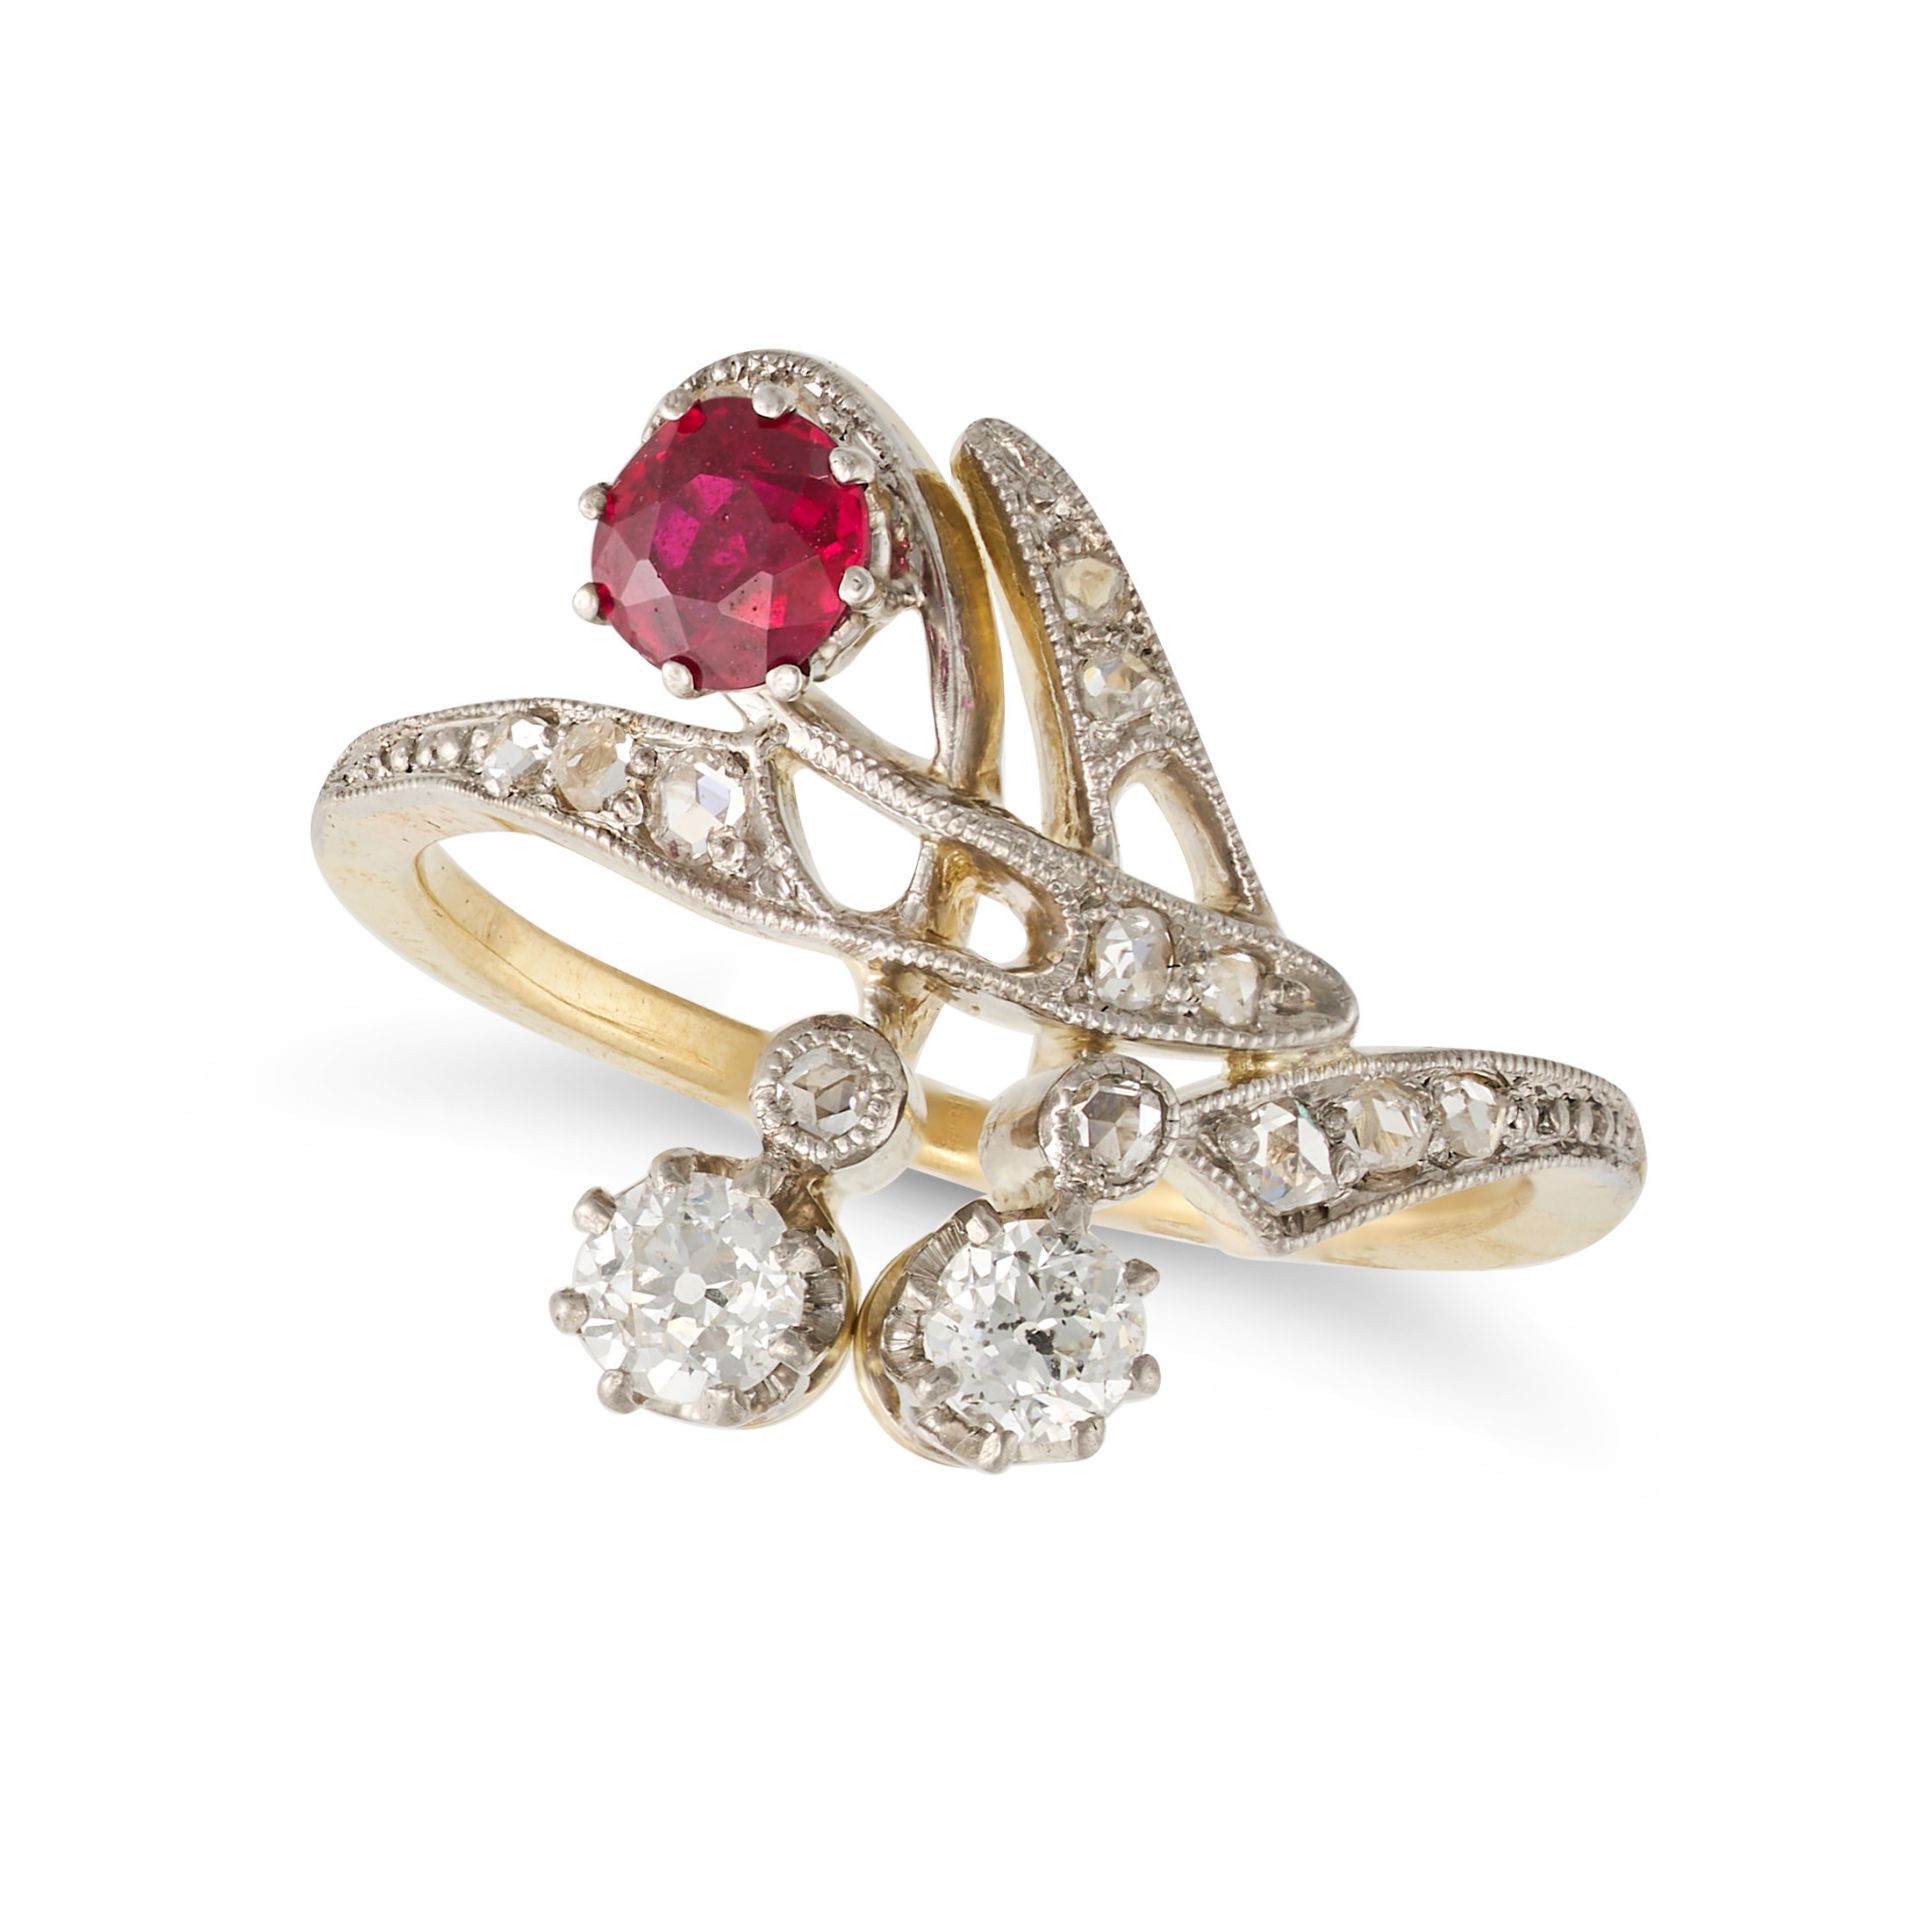 AN ANTIQUE RUBY AND DIAMOND DRESS RING, EARLY 20TH CENTURY in yellow gold and platinum, set with ...